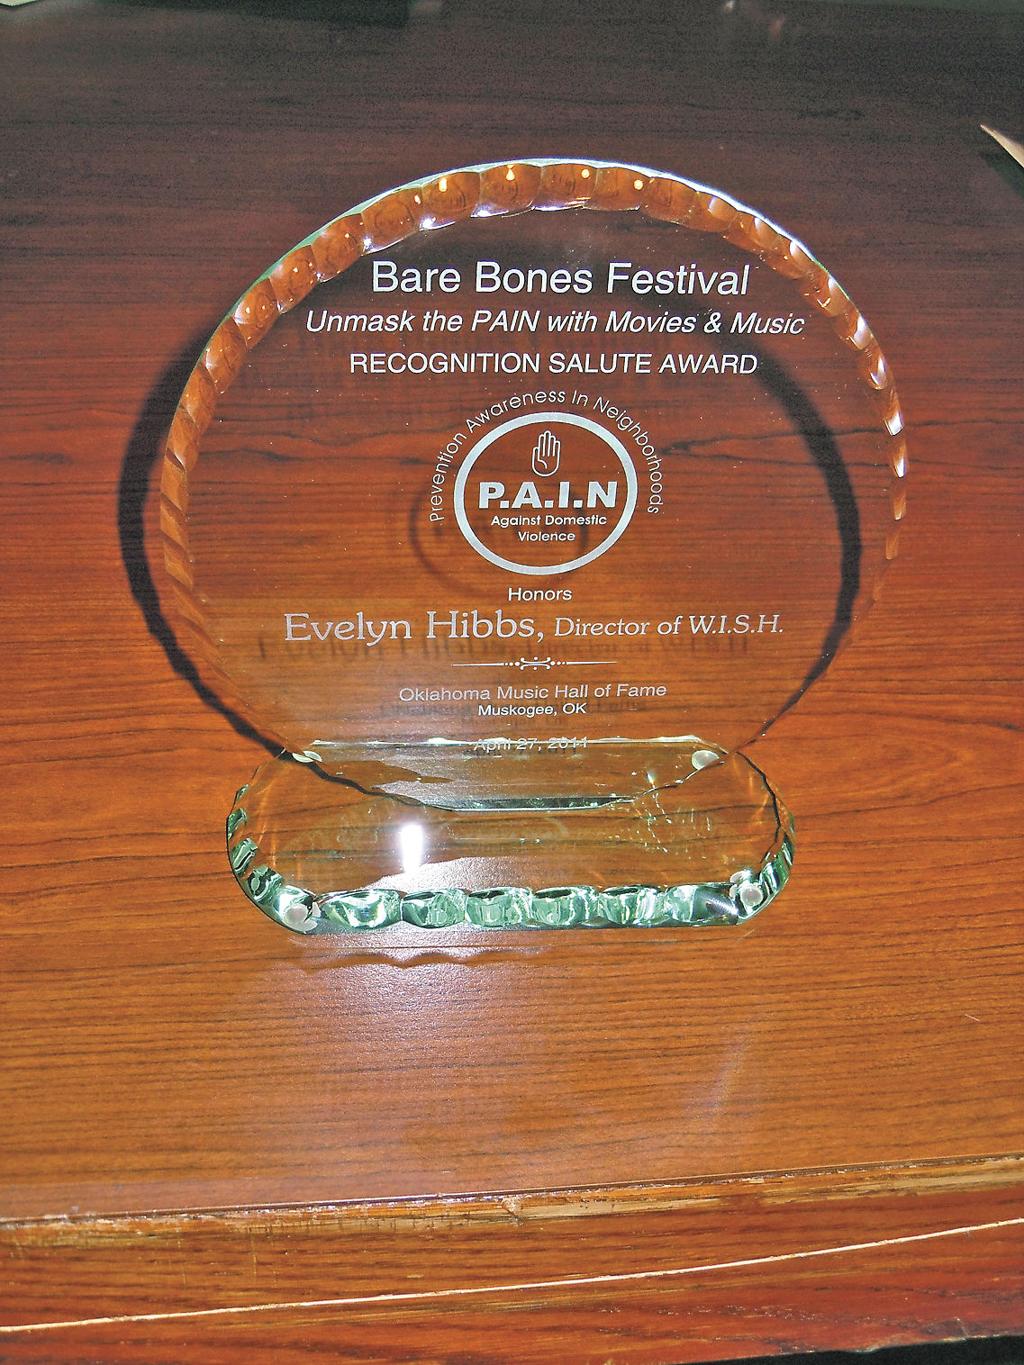 Advocate honored at Bare Bones event for work protecting women, children, Archives